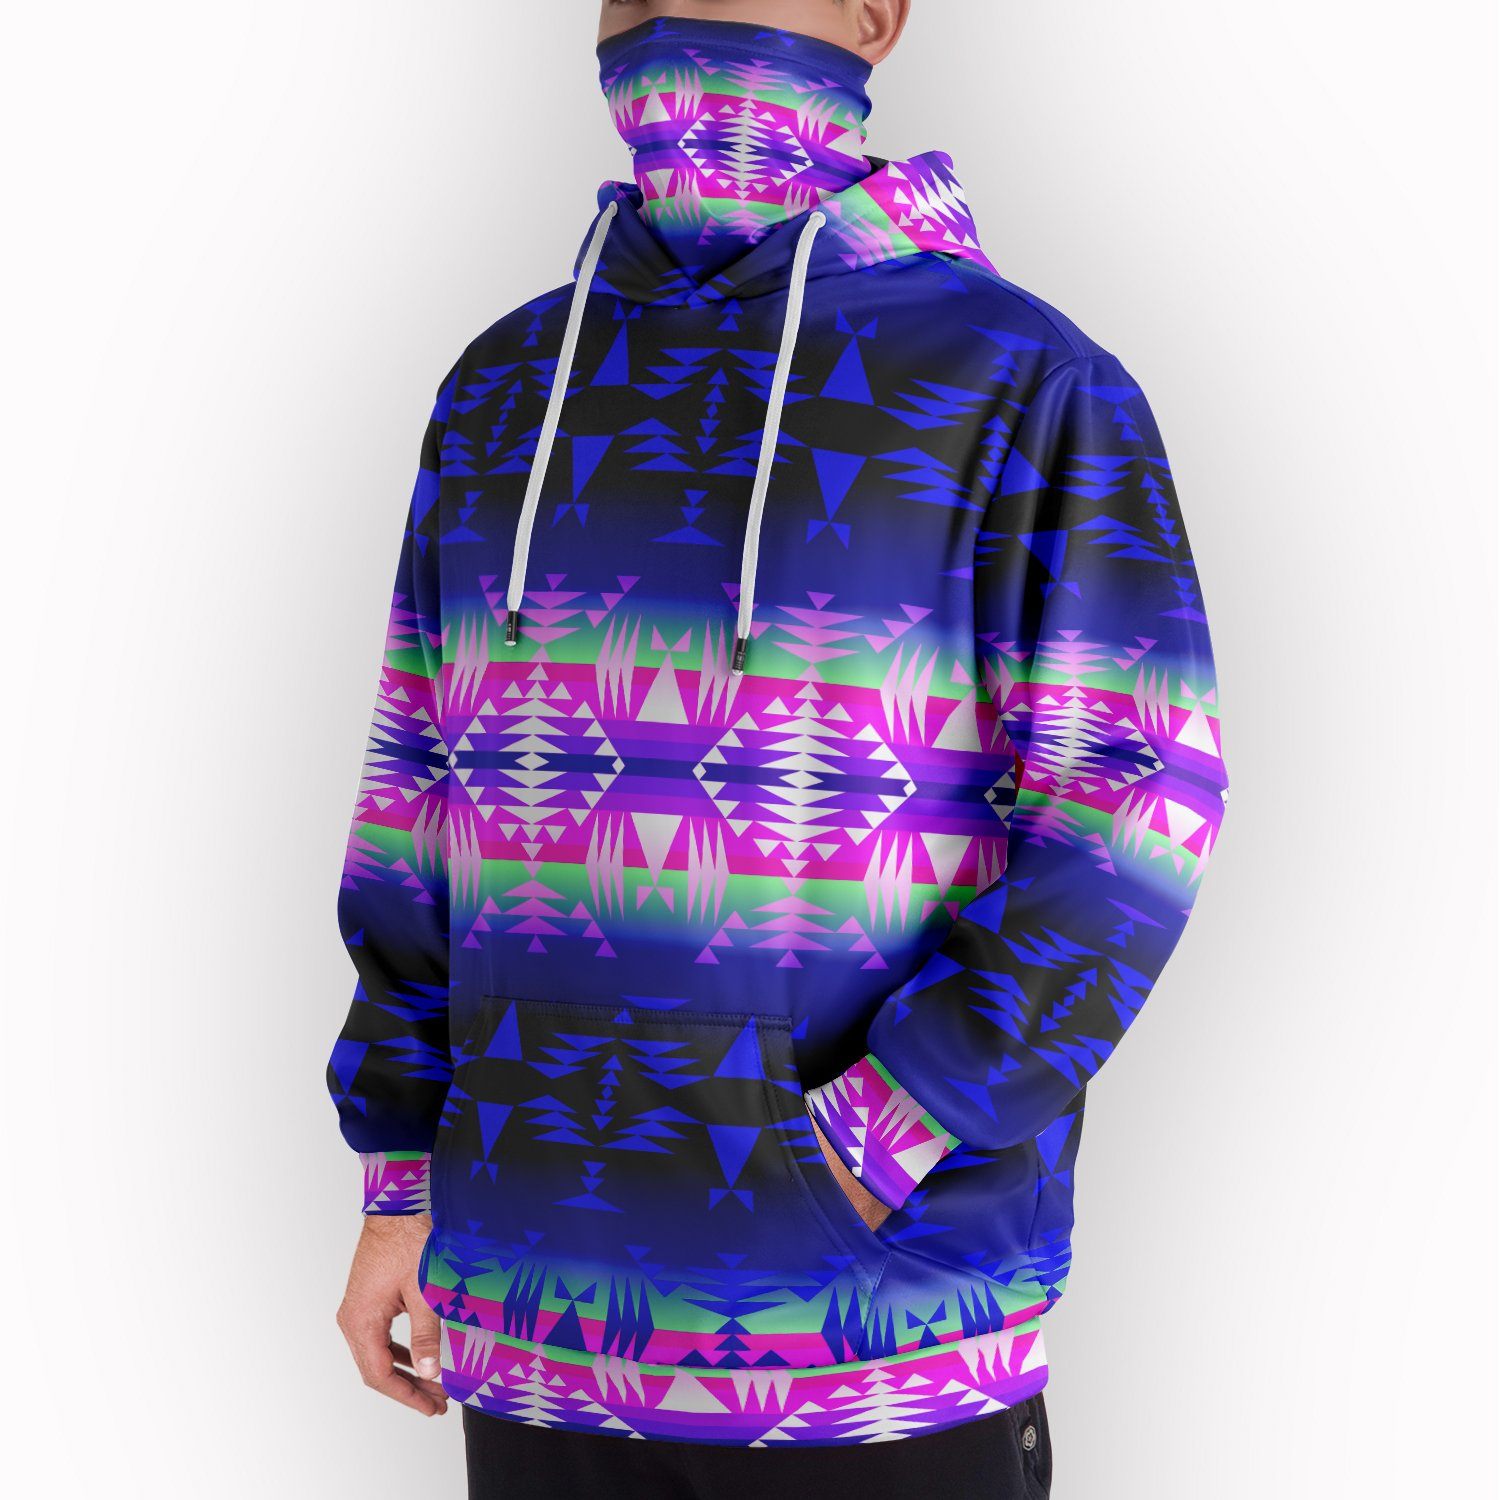 Between the Wasatch Mountains Hoodie with Face Cover 49 Dzine 